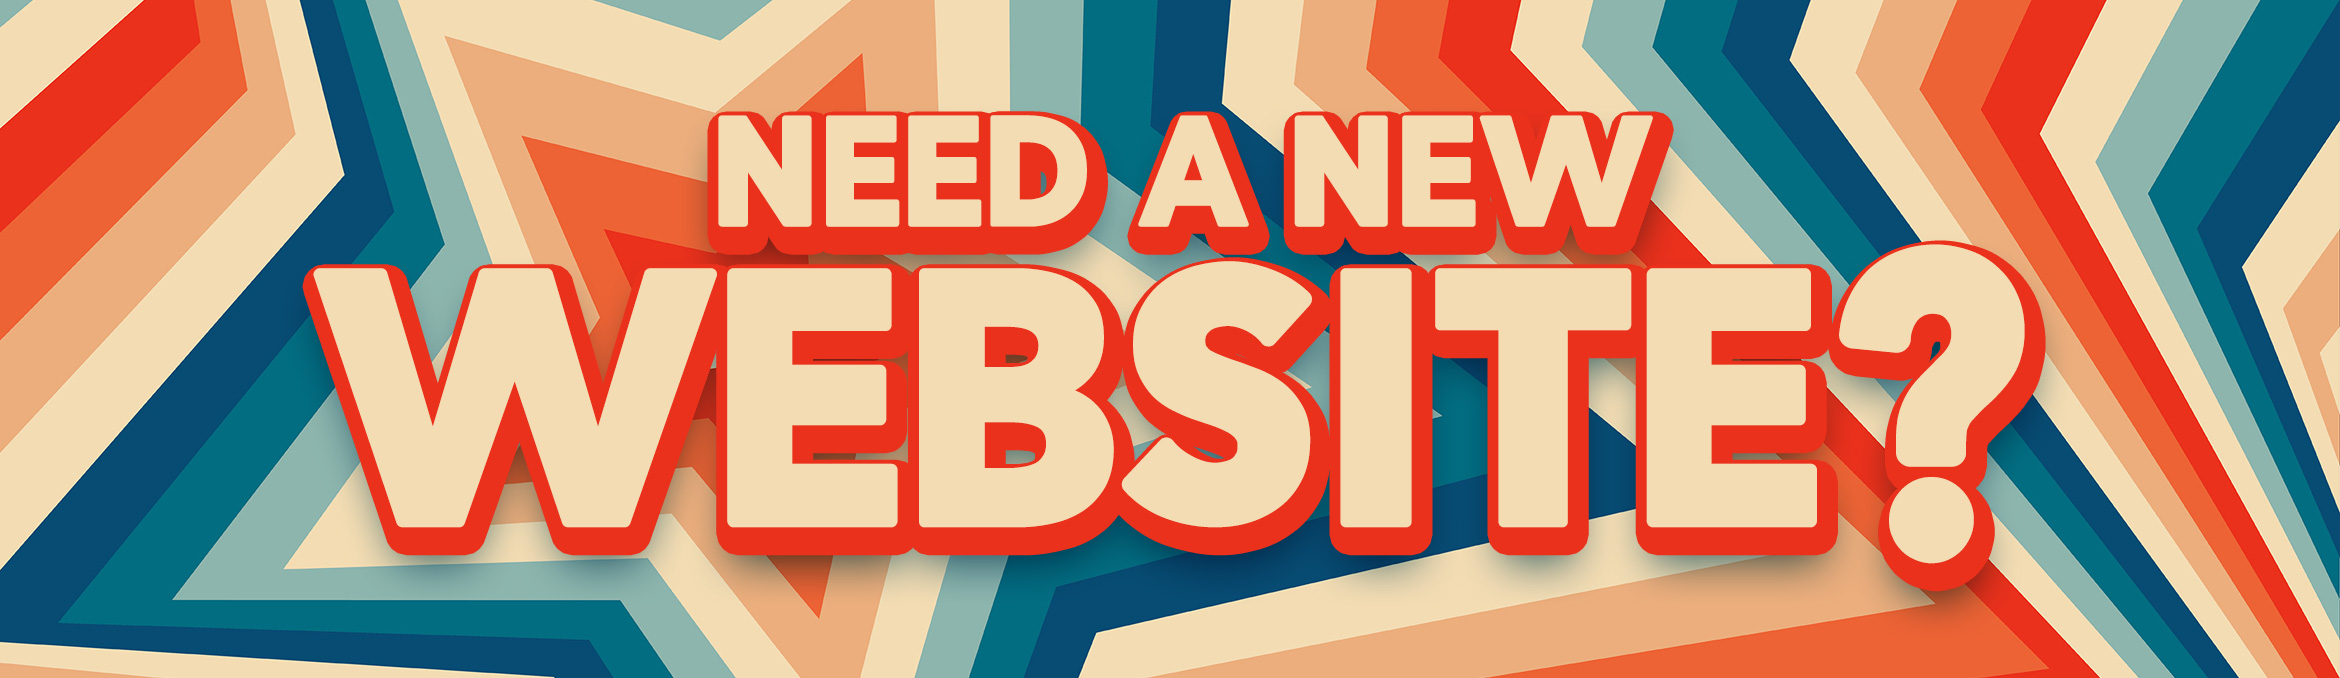 Need a new Website?